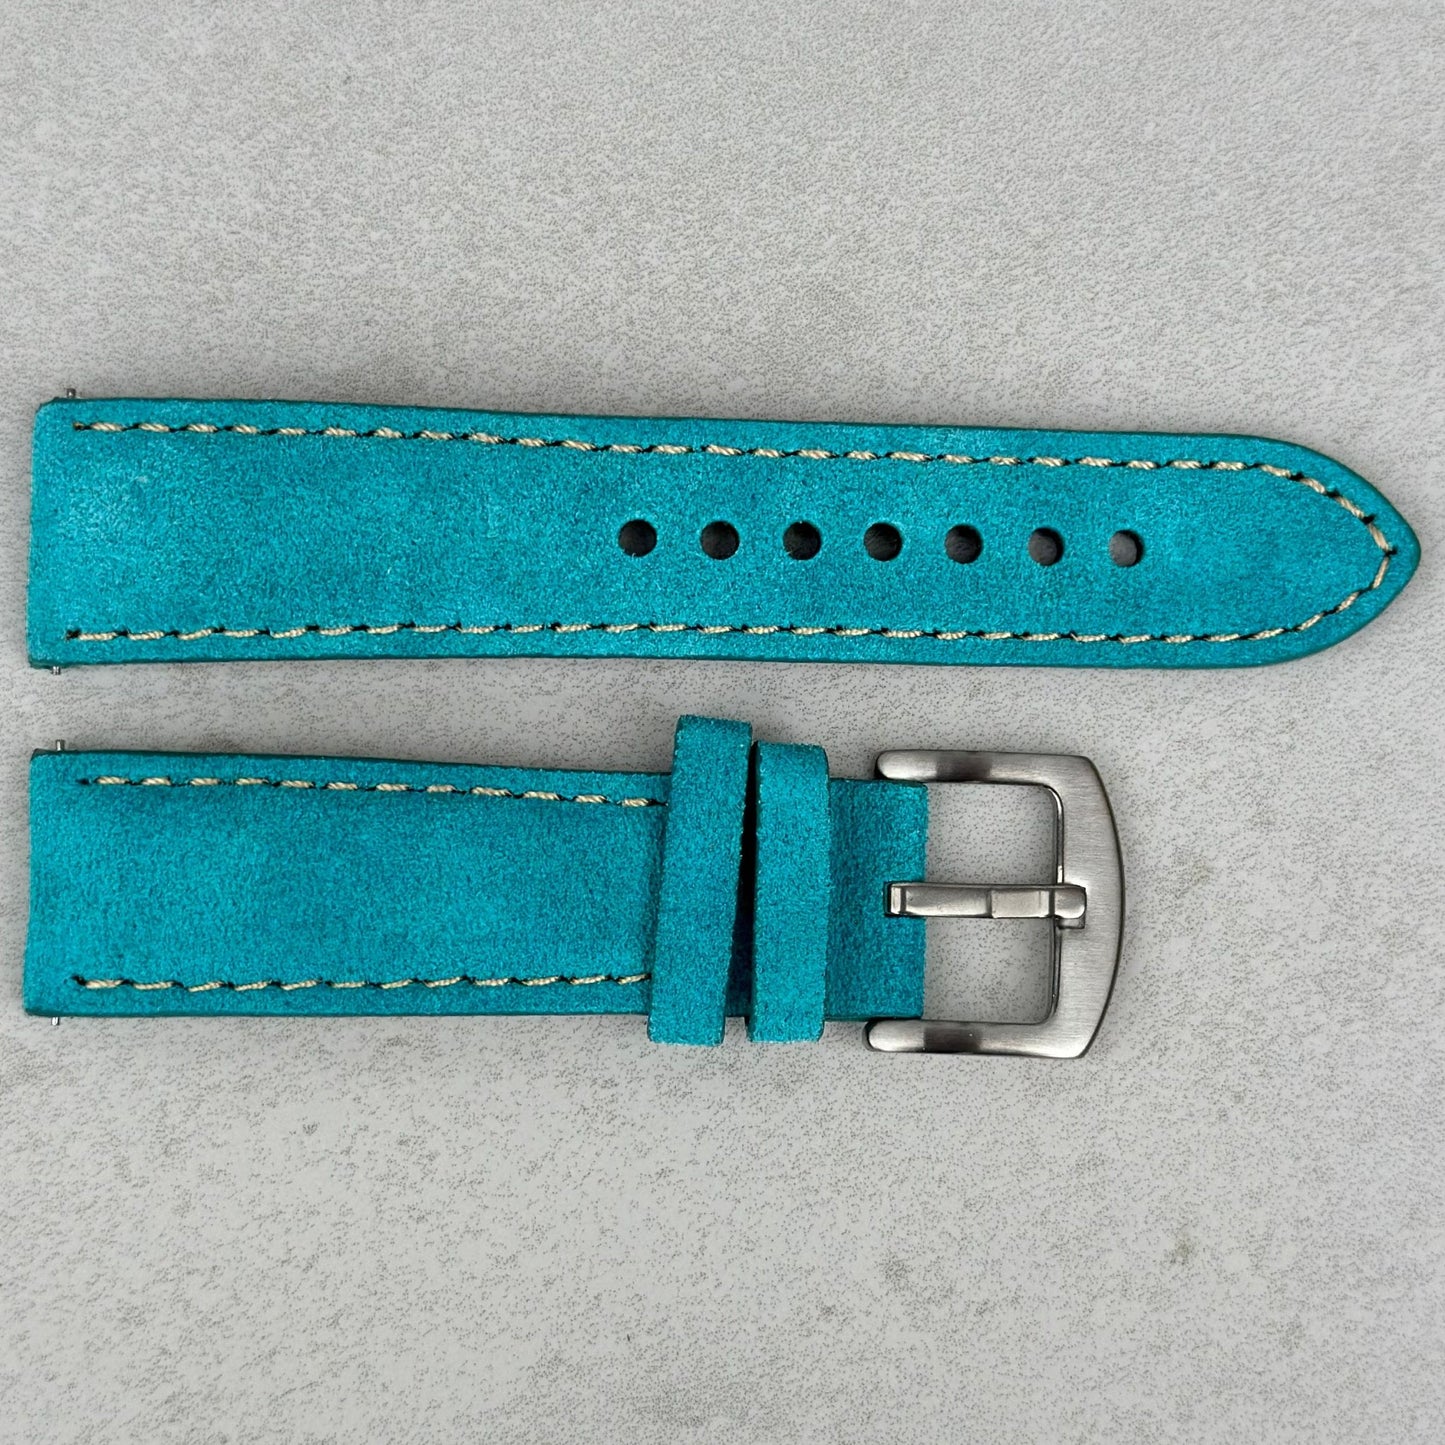 Paris turquoise suede watch strap with contrast ivory stitching. 18mm, 20mm, 22mm, 24mm. Watch And Strap.